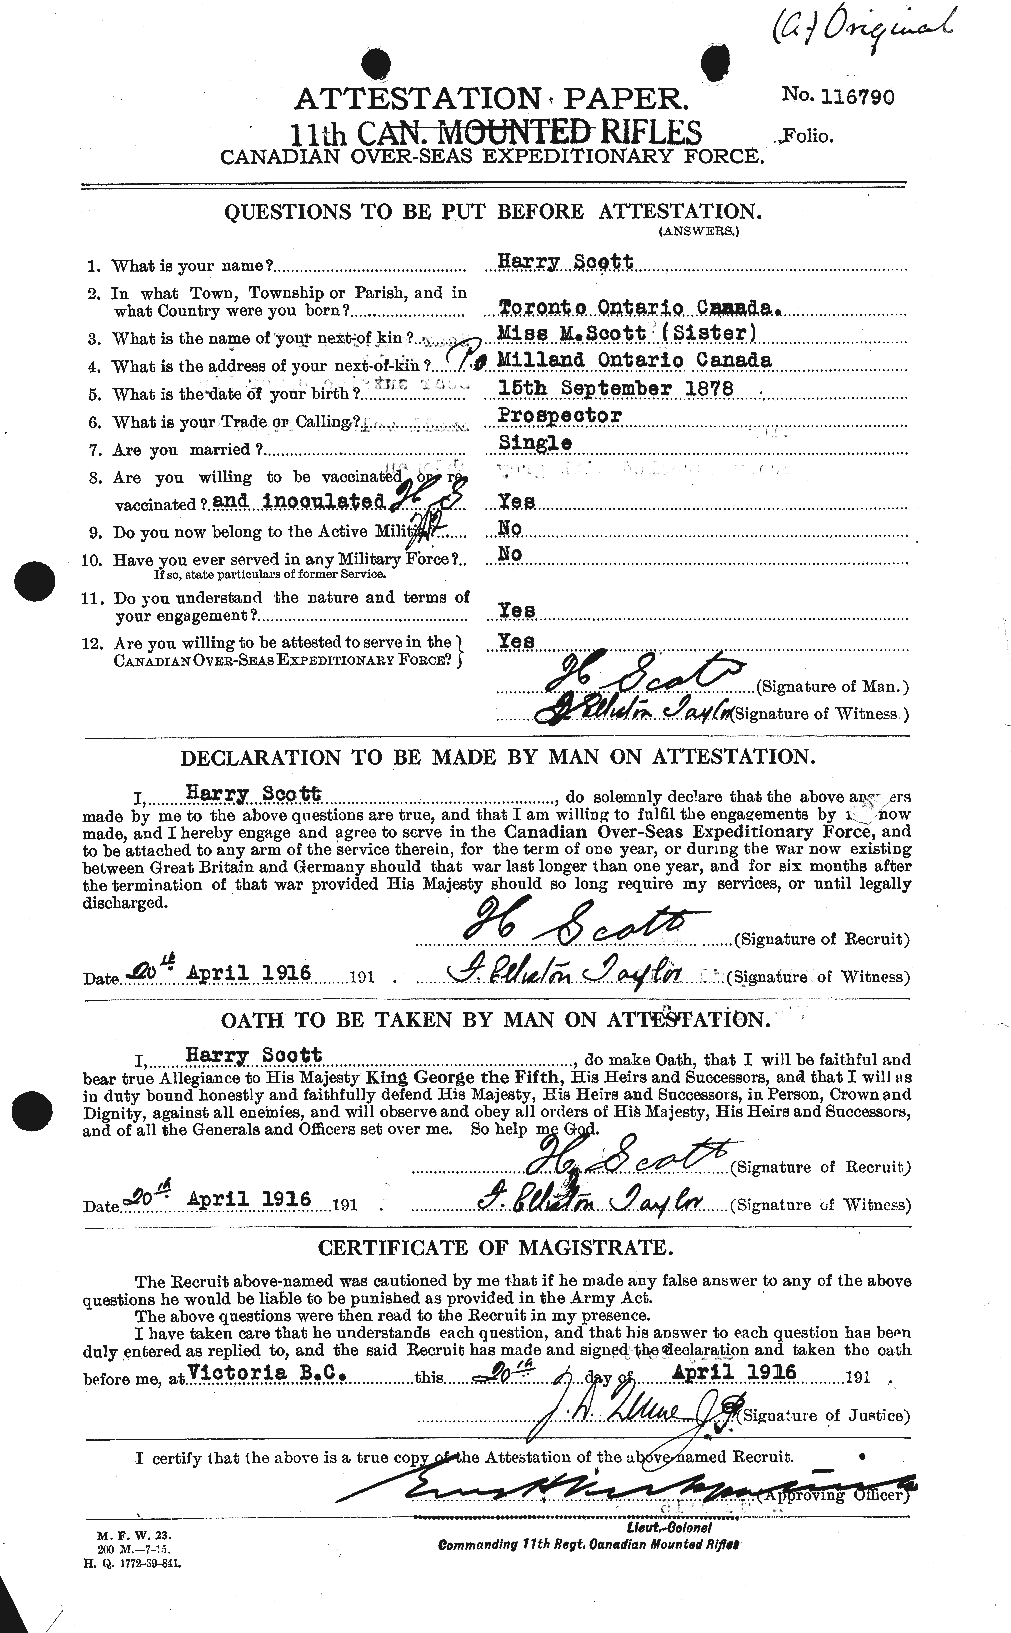 Personnel Records of the First World War - CEF 086322a